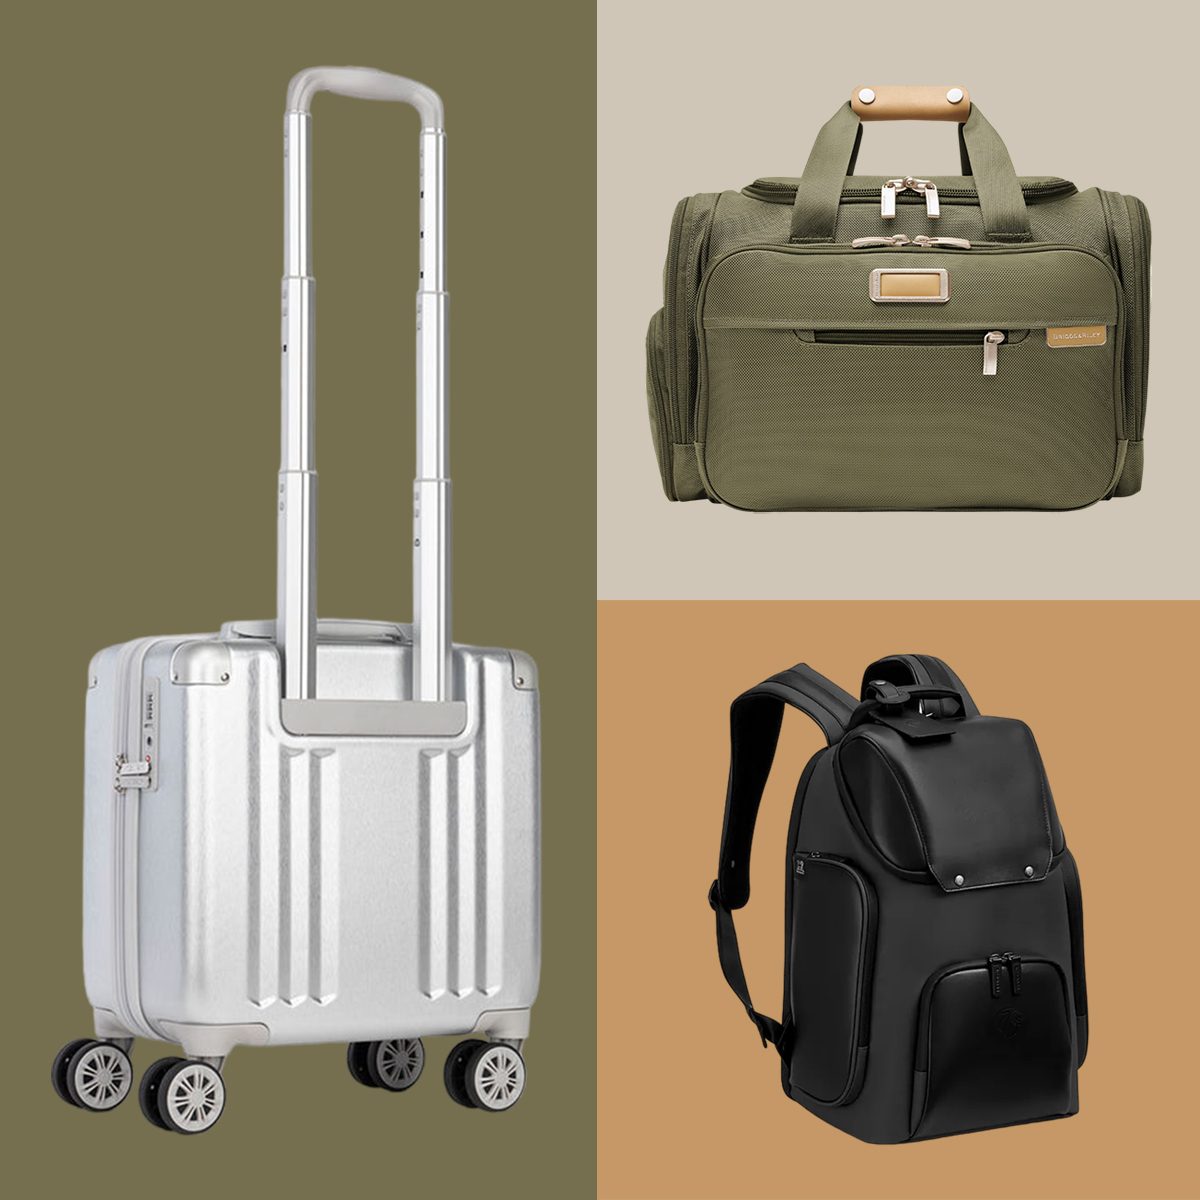 Best Carry-on Bags for Extra Legroom